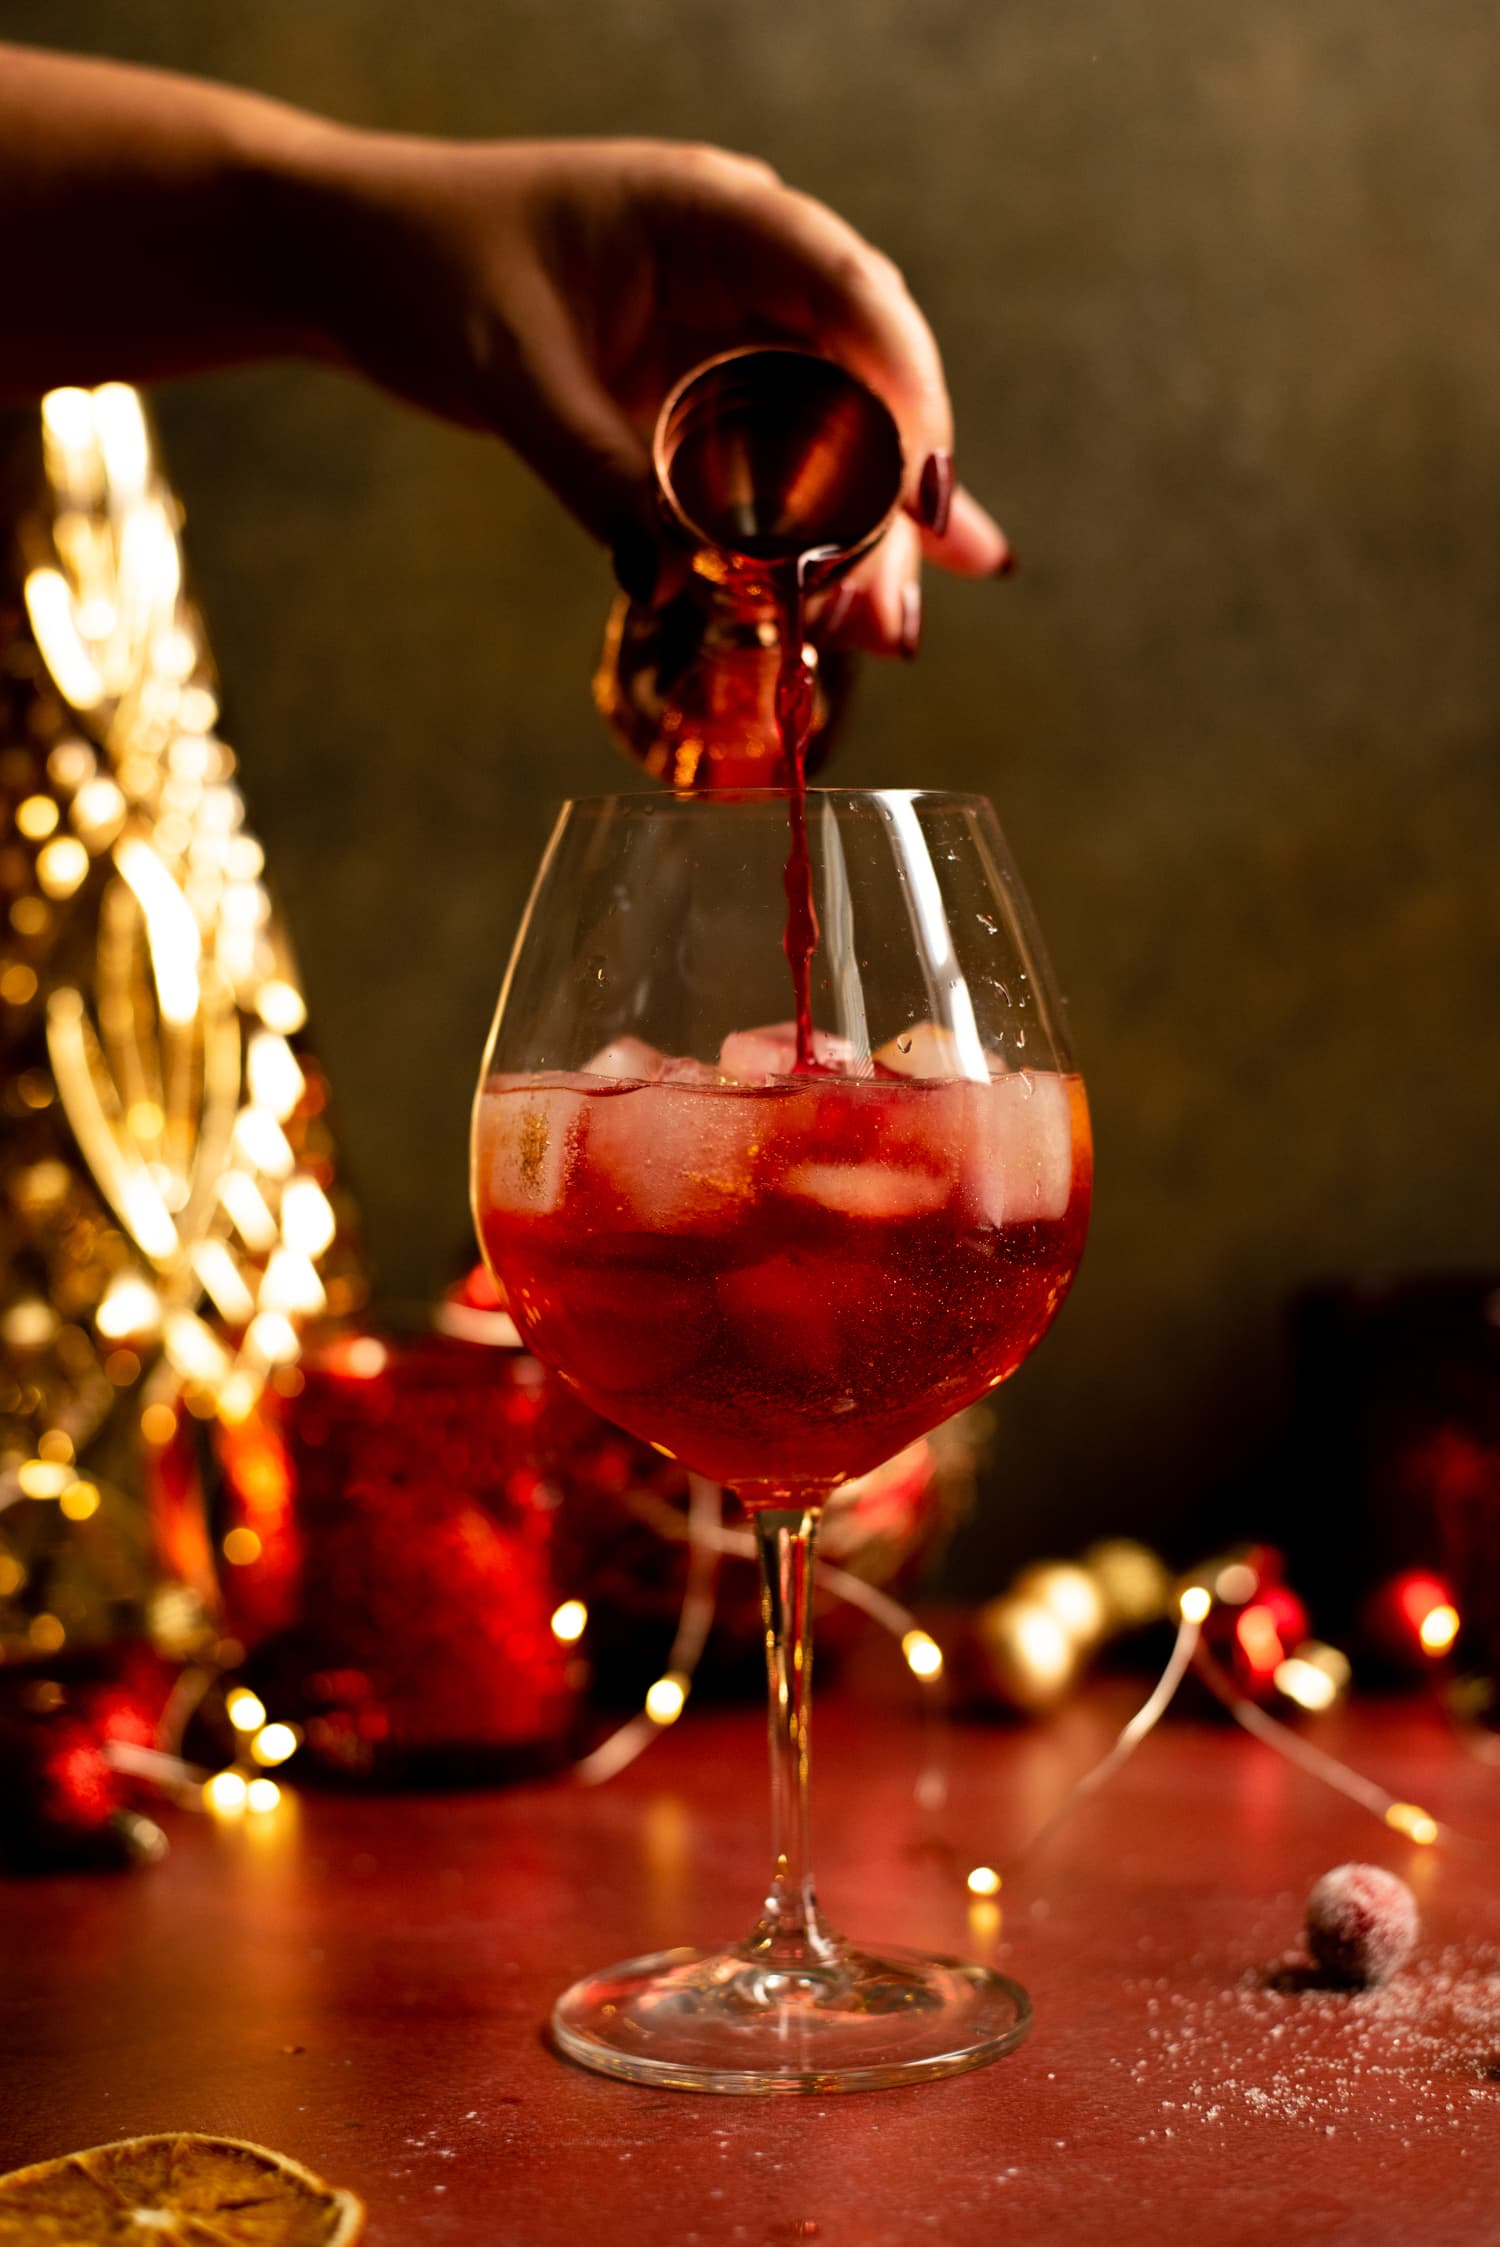 The cranberry juice being added to the cocktail.